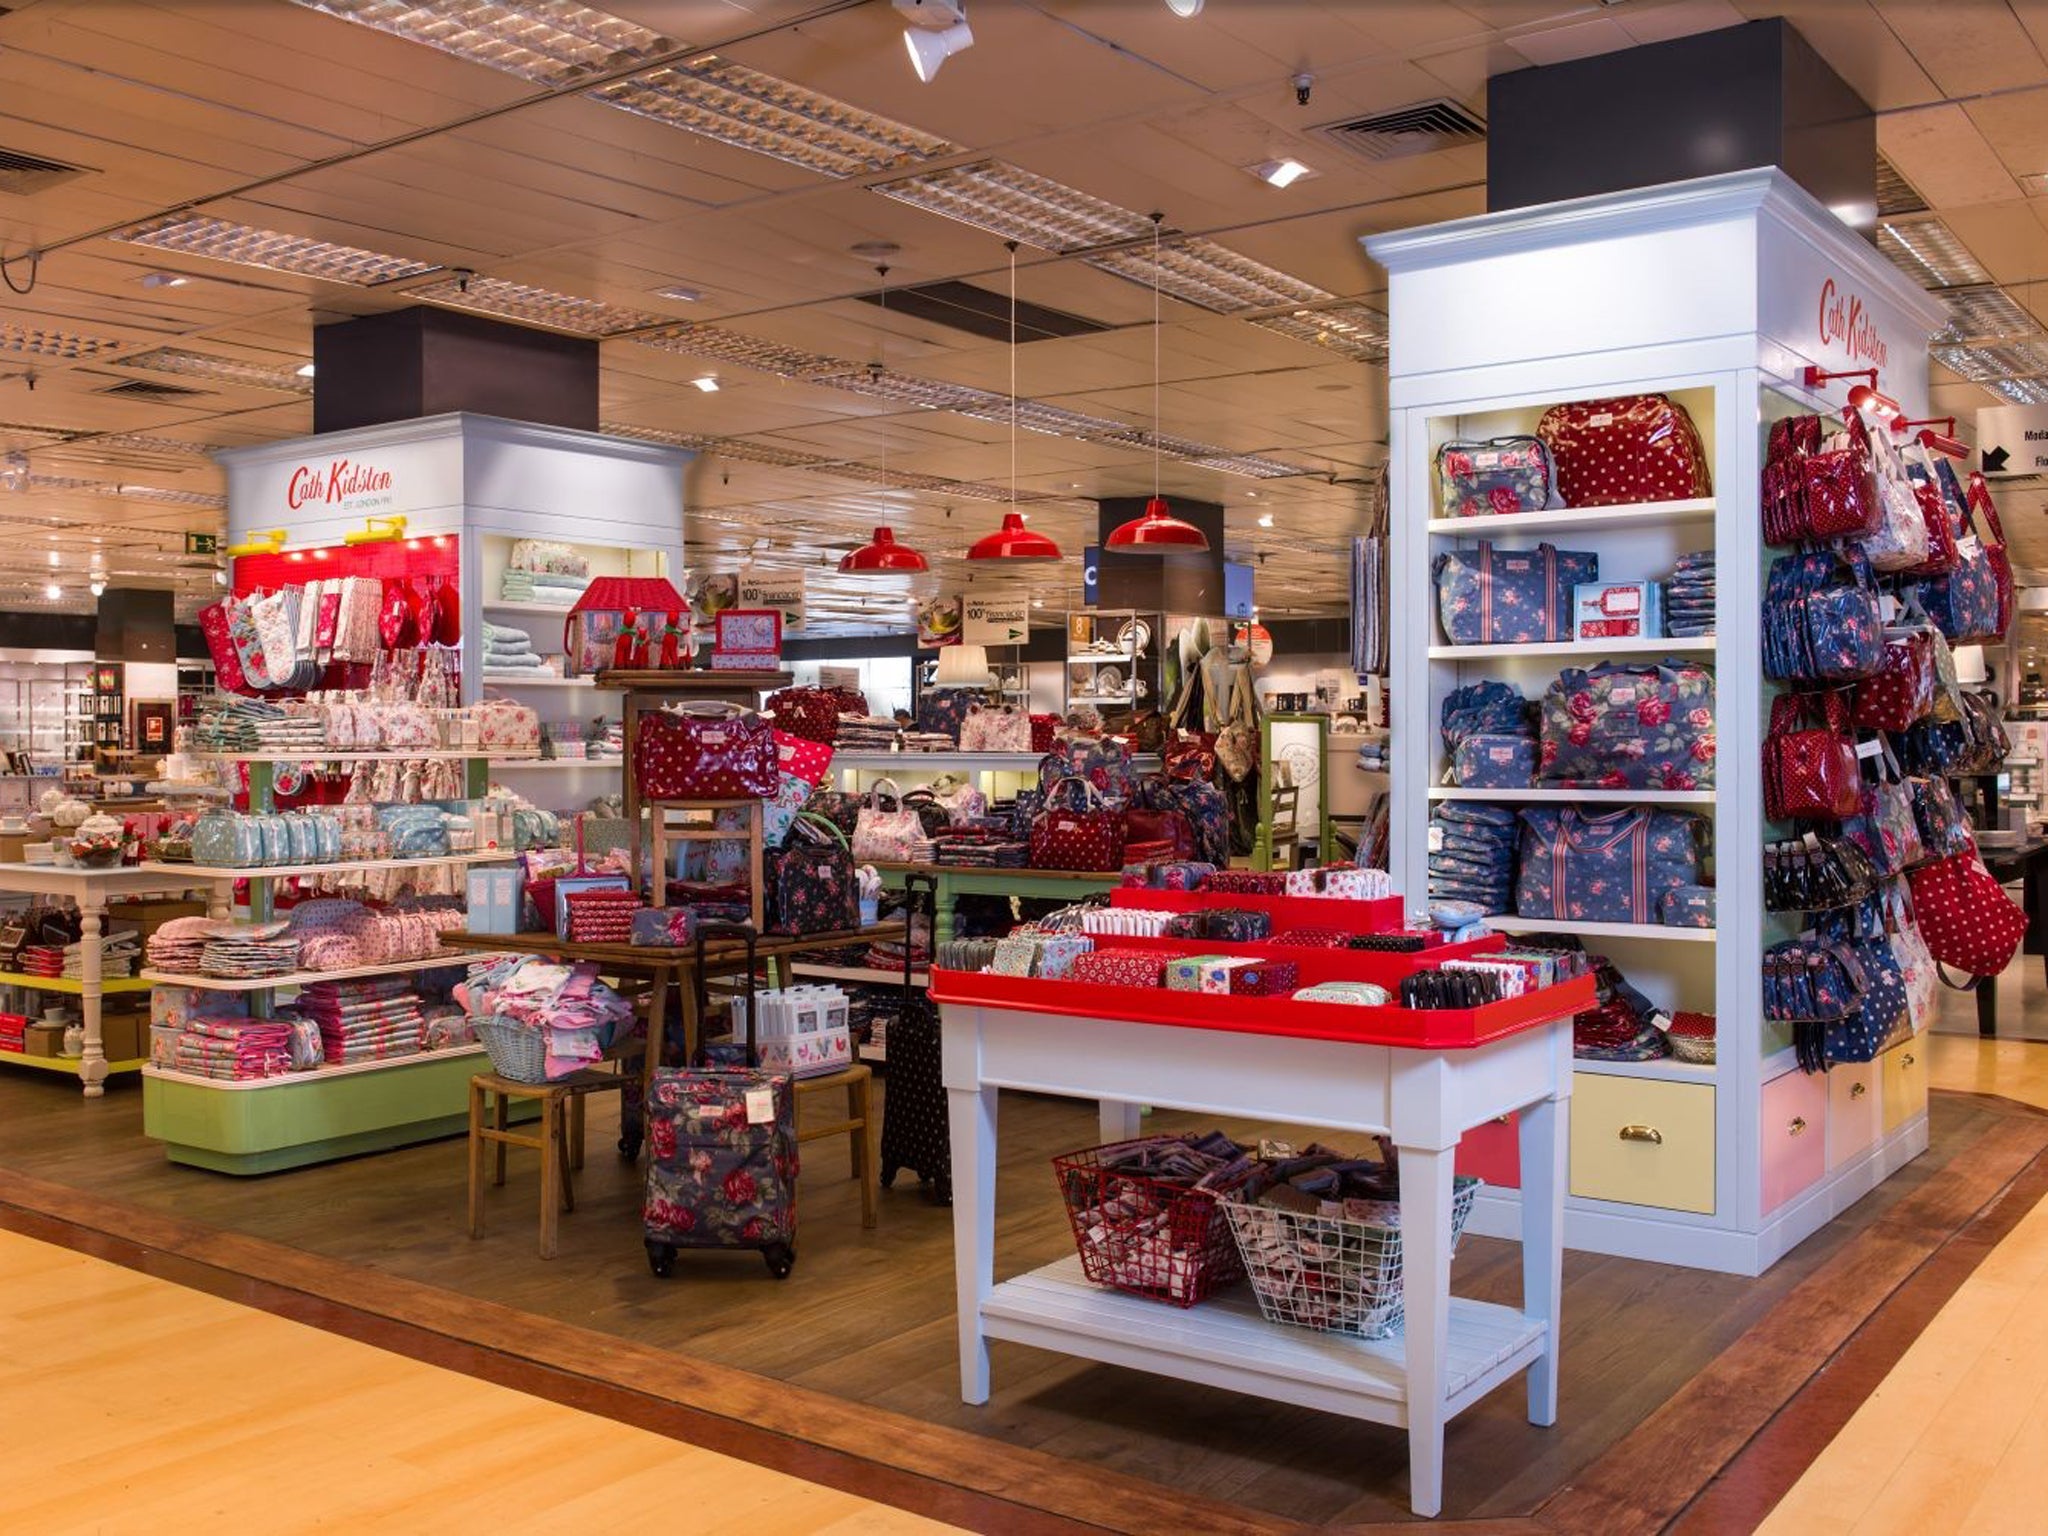 cath kidston in trouble